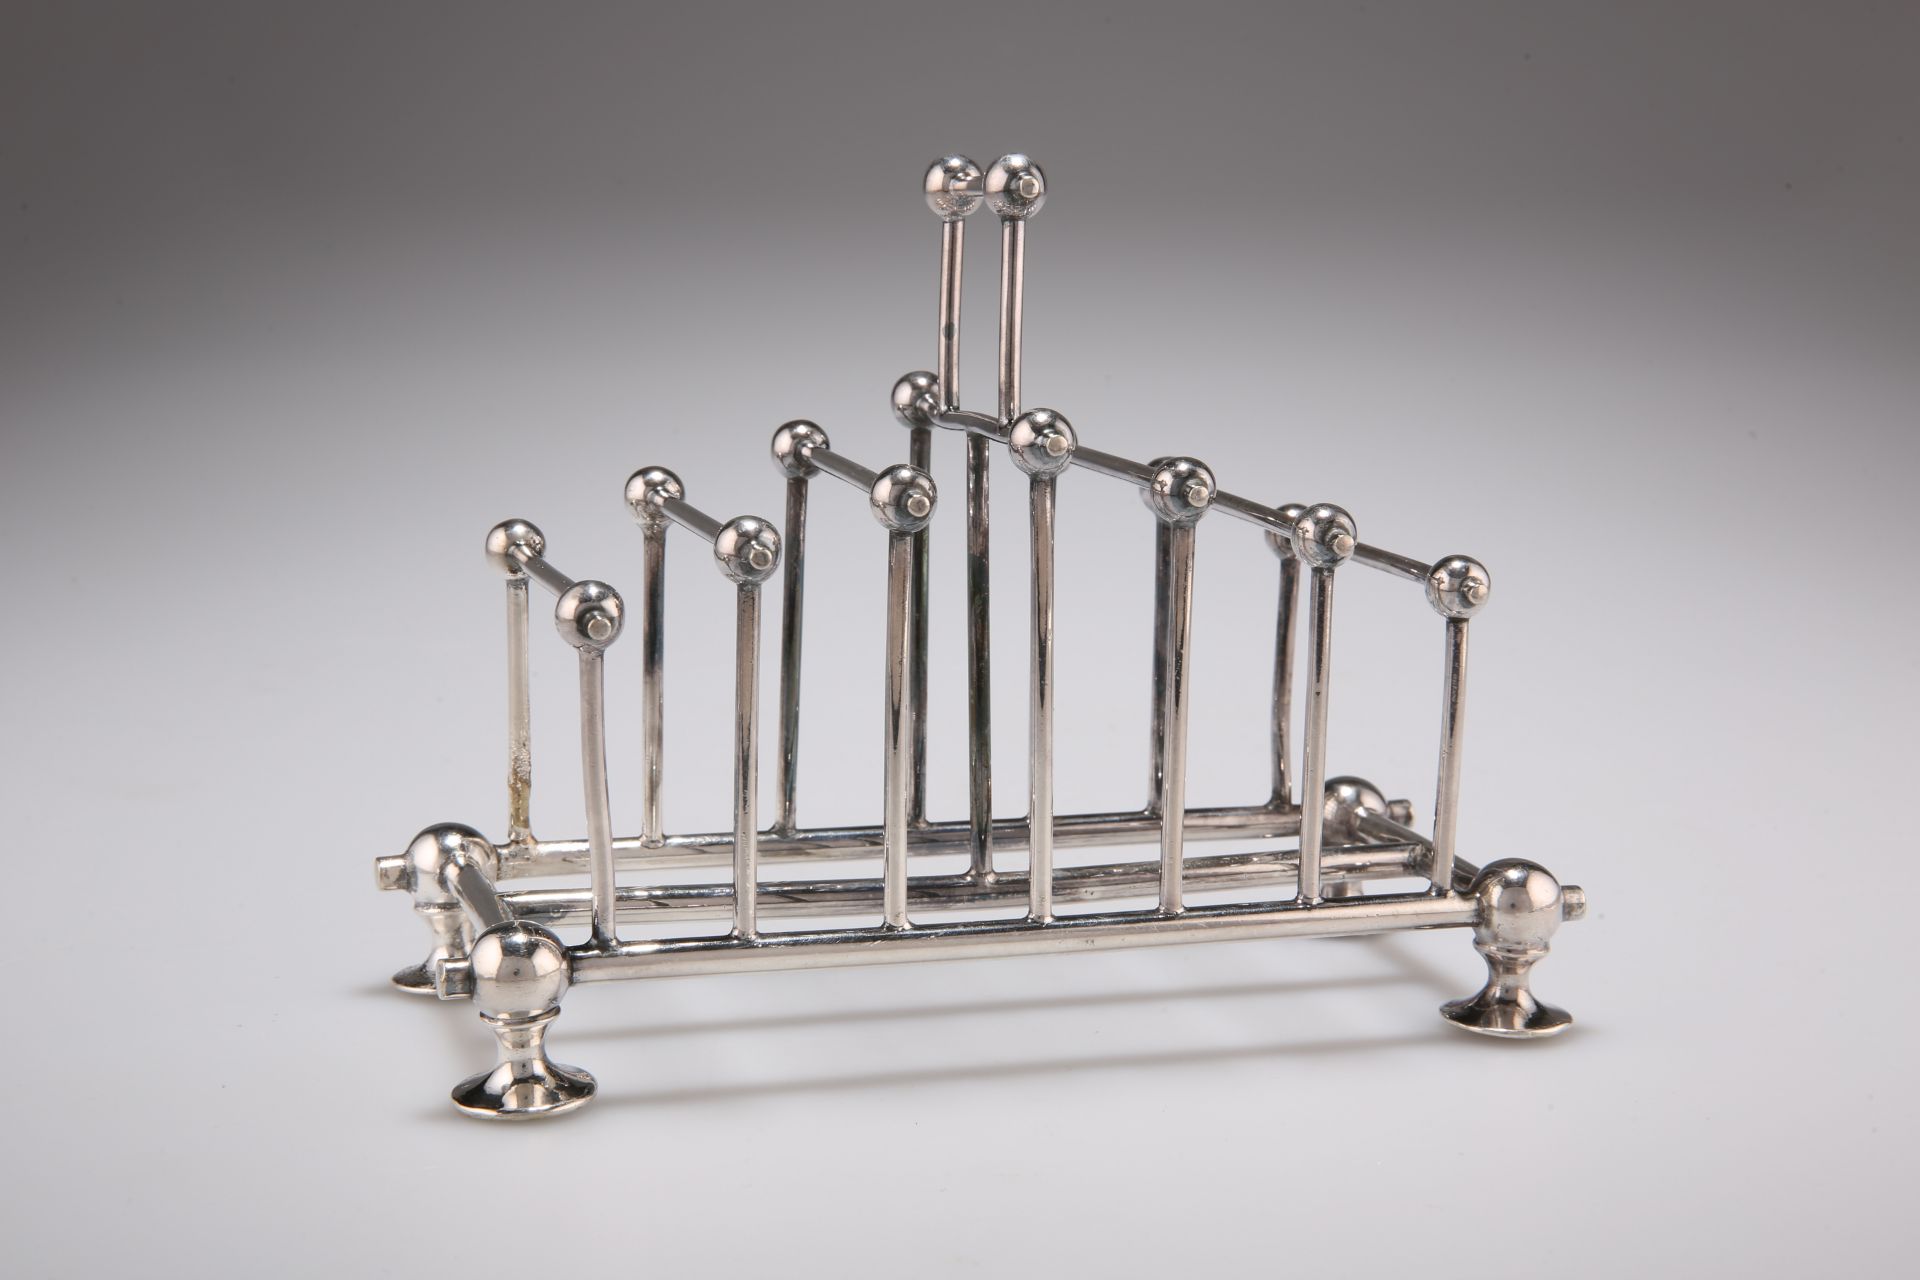 AN AESTHETIC SILVER-PLATED TOAST RACK, IN THE STYLE OF CHRISTOPHER DRESSER